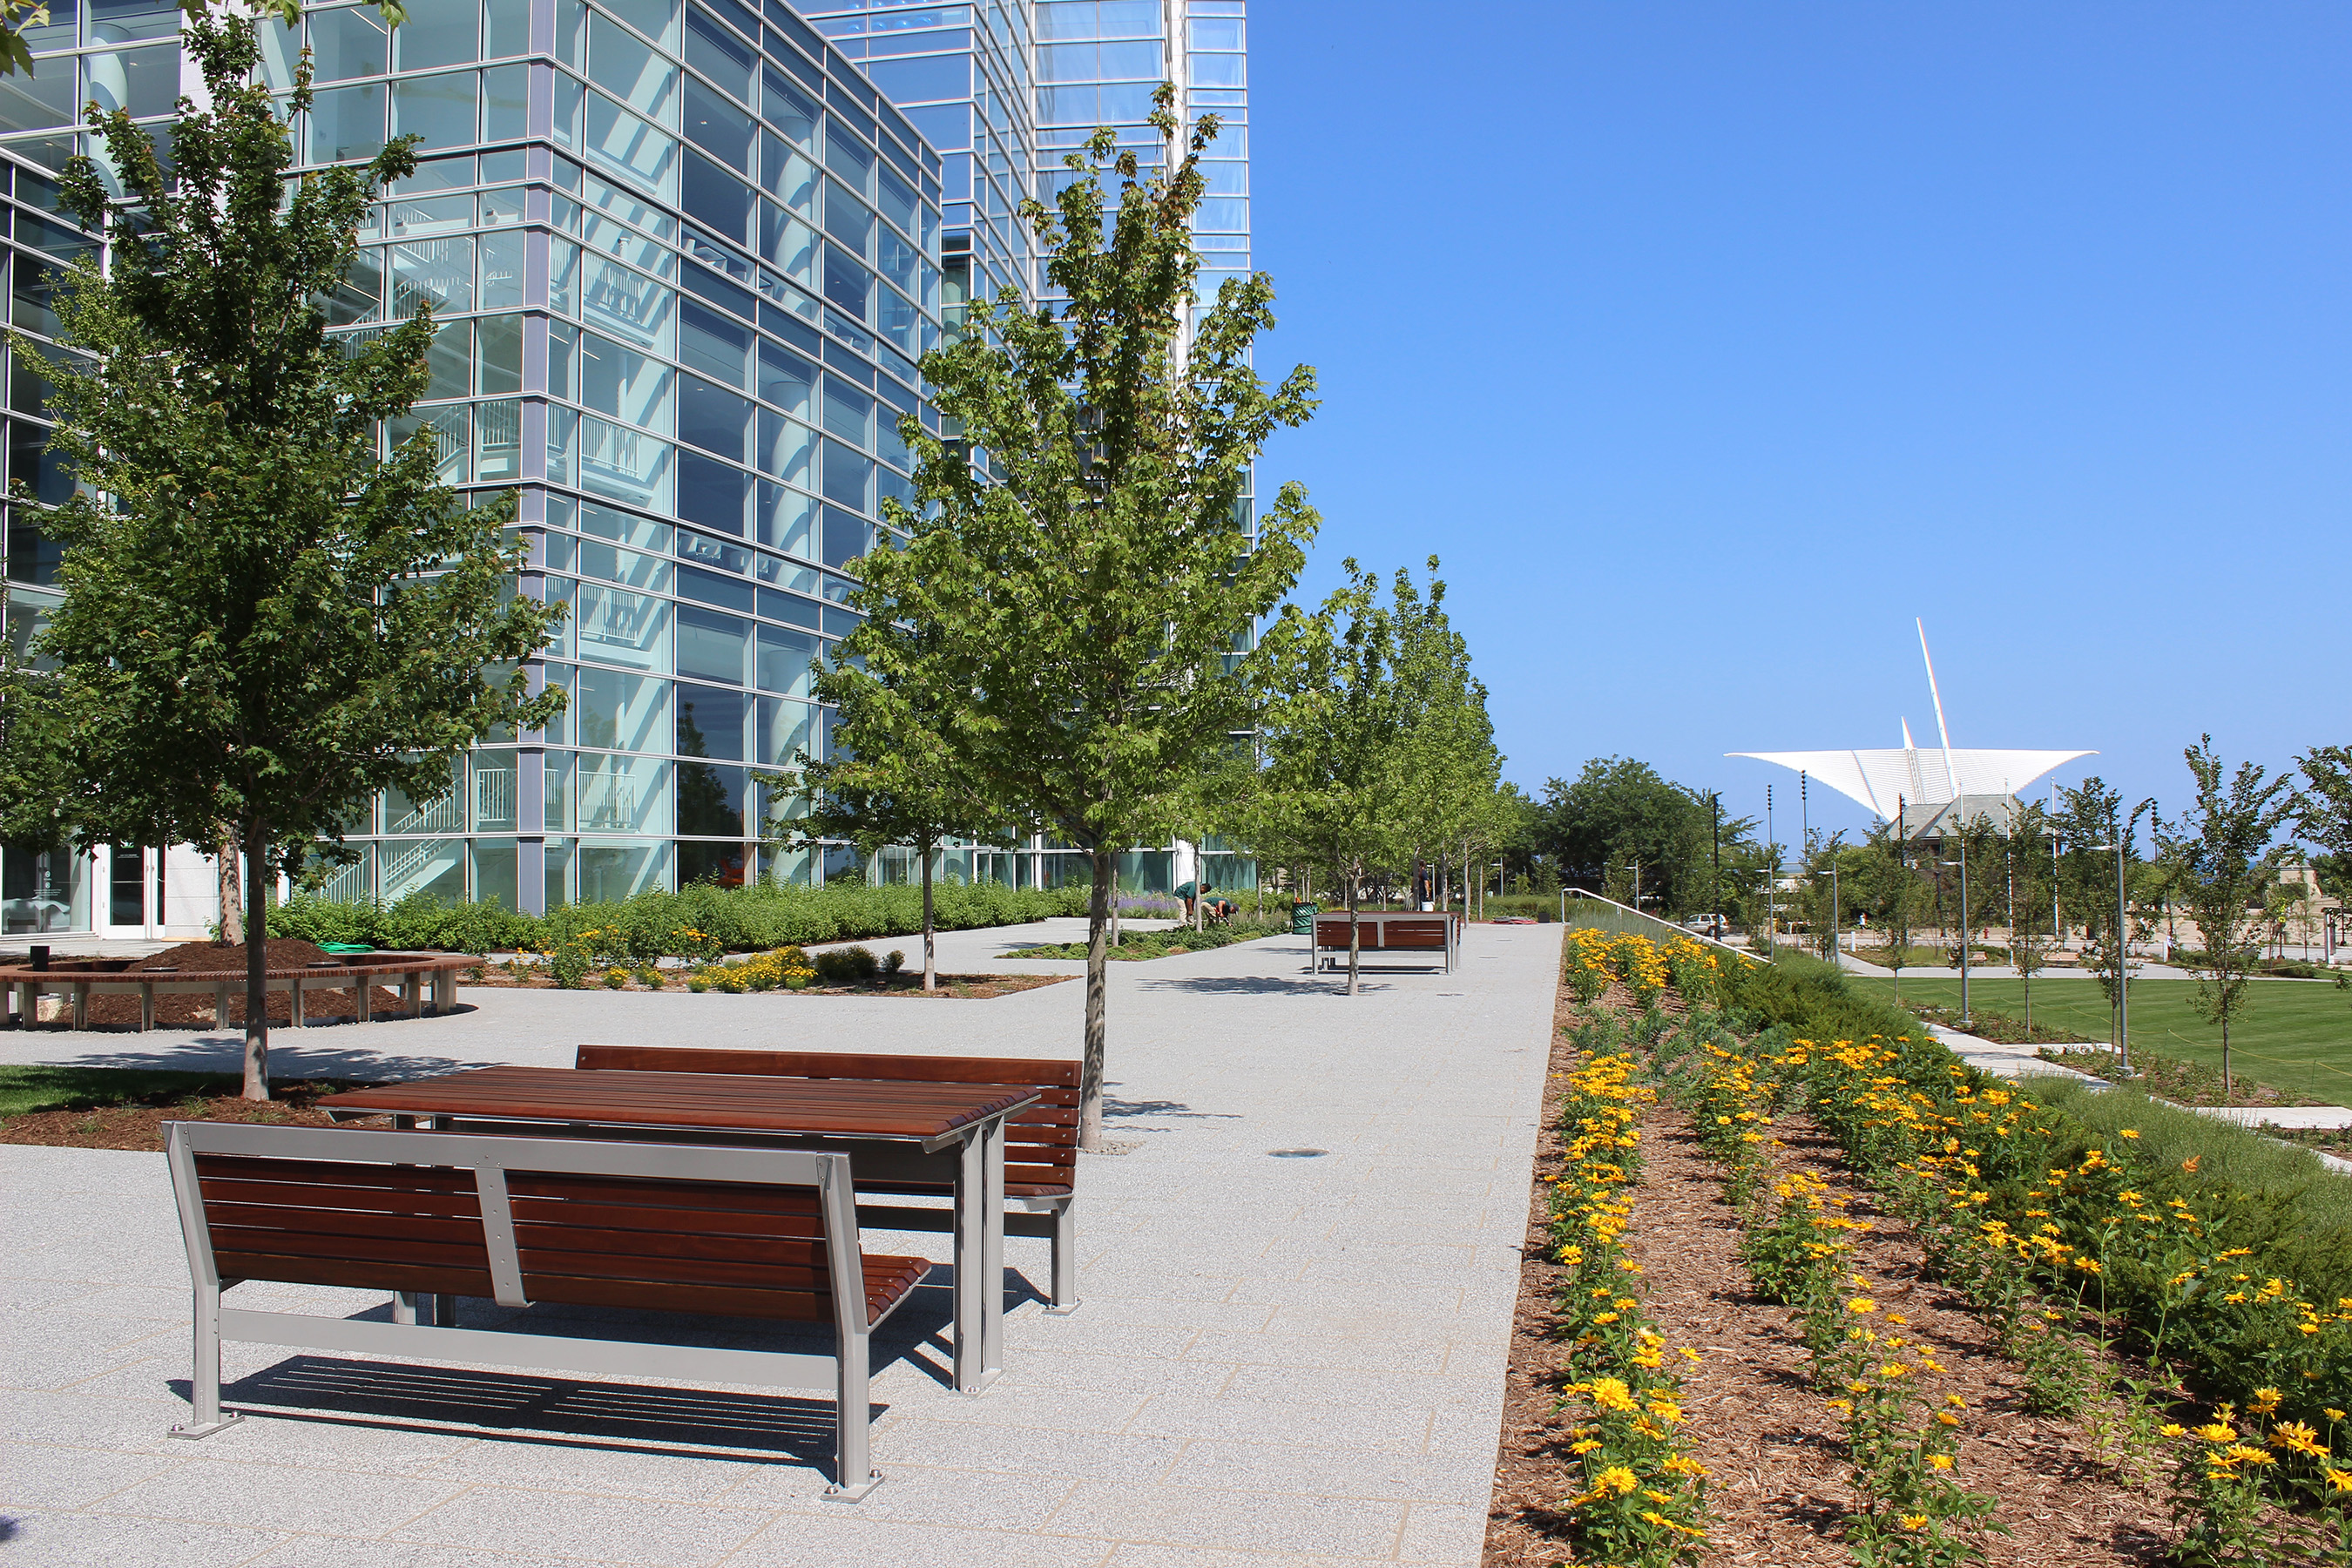 The Northwestern Mutual Gardens includes three acres of landscaped green space, walkways and seating on the south side of The Tower and Commons and is open to the public.